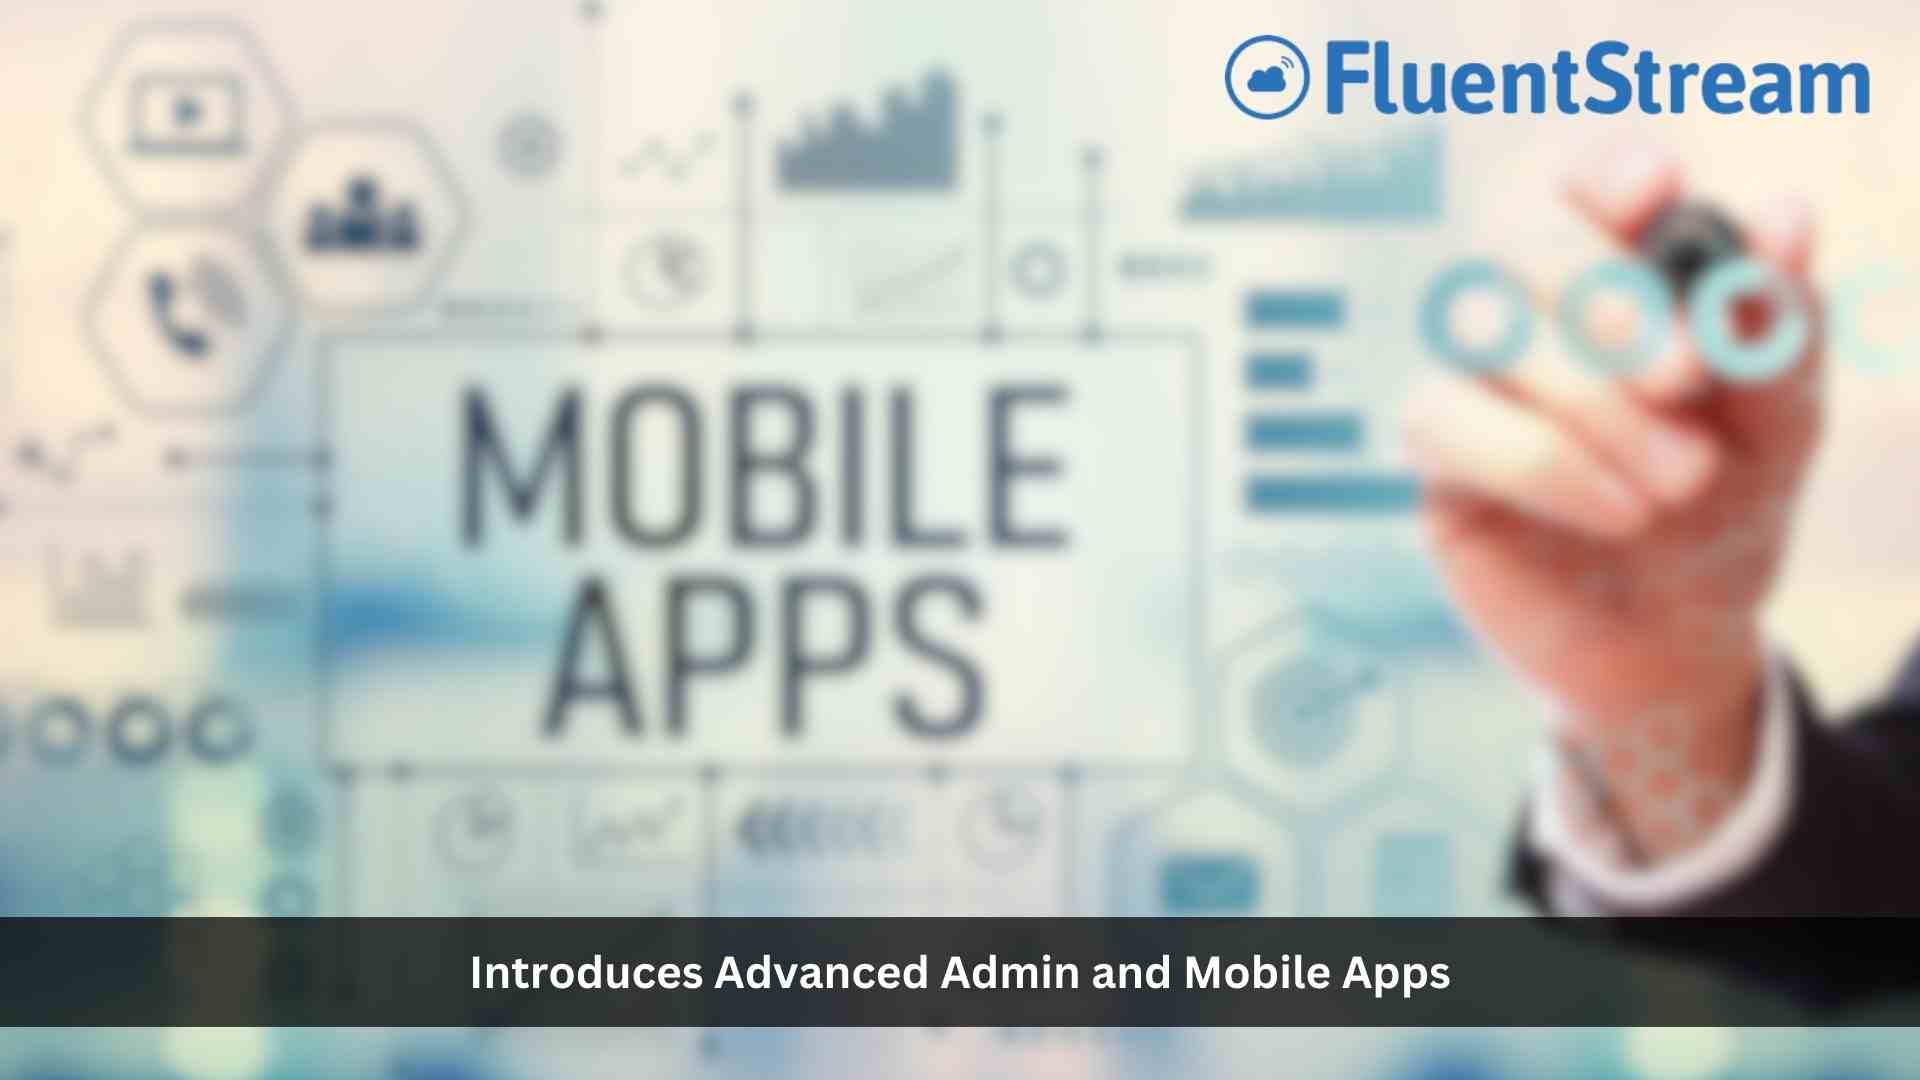 FluentStream Introduces Advanced Admin and Mobile Apps